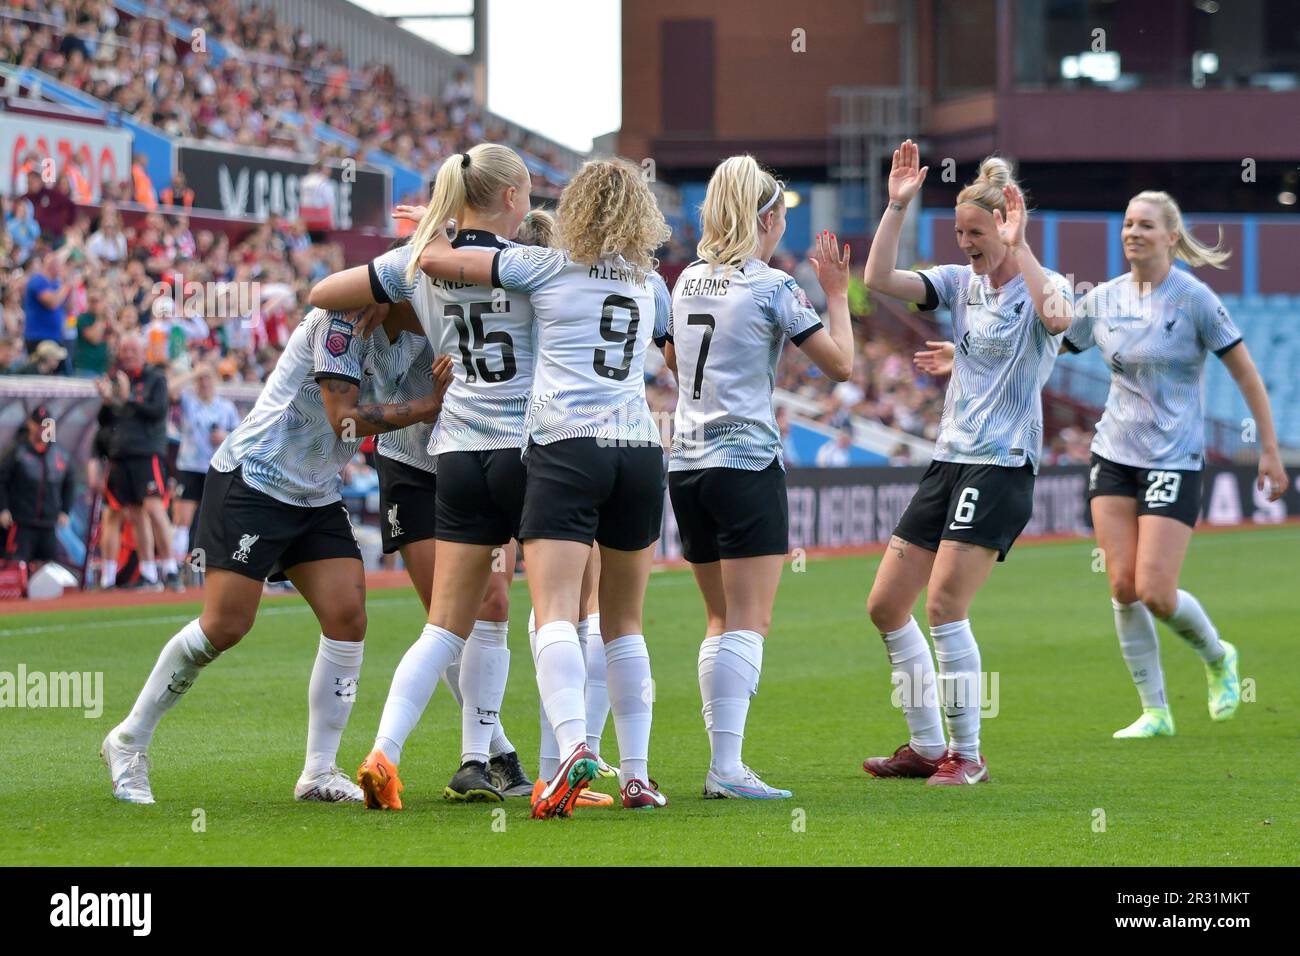 Birmingham, England. 21 May 2023. Liverpool players celebrate their side's third goal during the Barclays Women's Super League game between Aston Villa and Liverpool at Villa Park in Birmingham, England, UK on 21 May 2023. Credit: Duncan Thomas/Majestic Media/Alamy Live News. Stock Photo